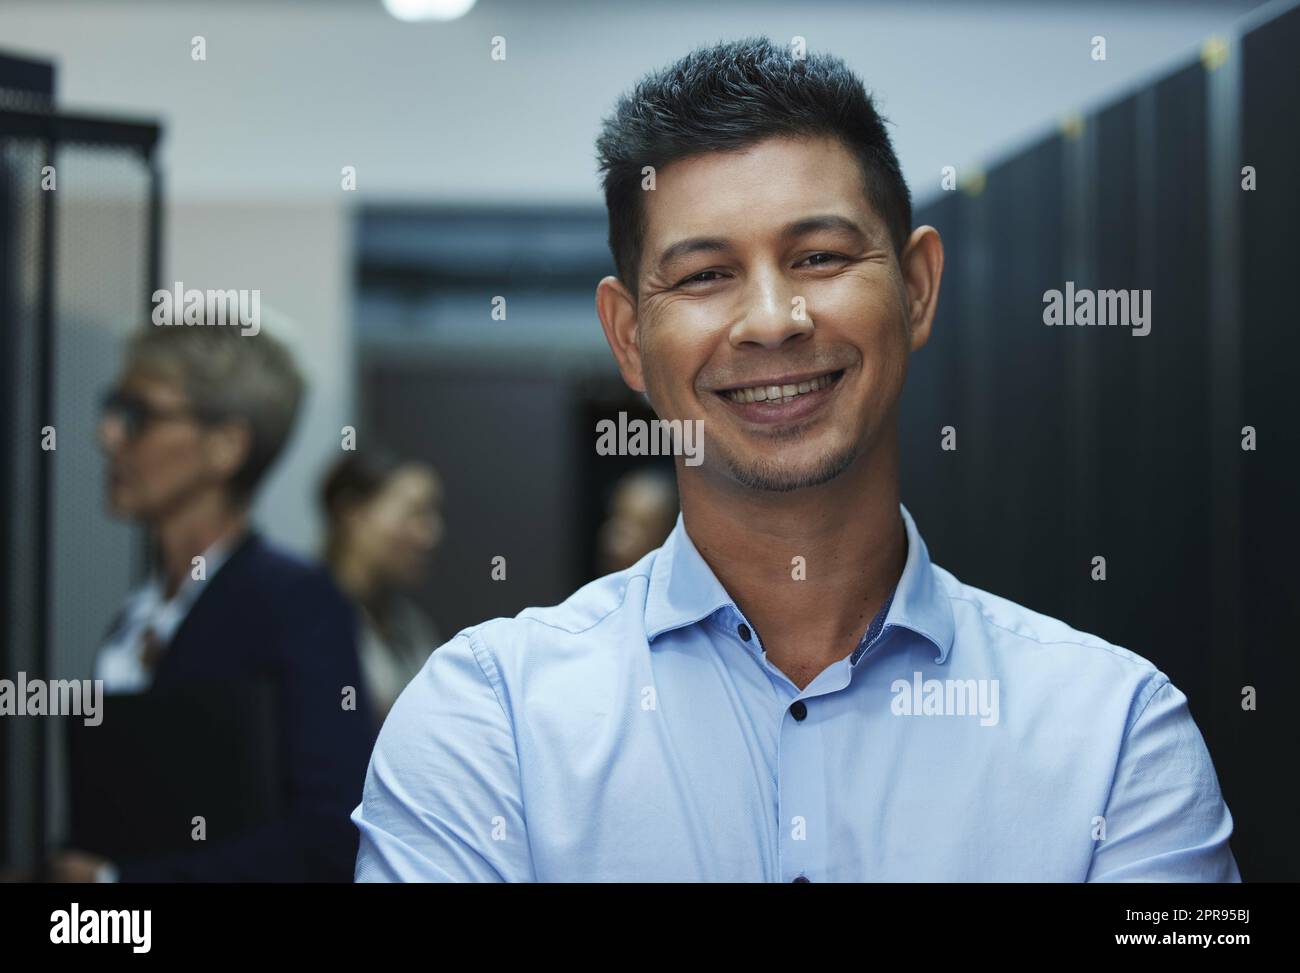 Another version of a beautiful mind. Portrait of a happy man working in a server room. Stock Photo